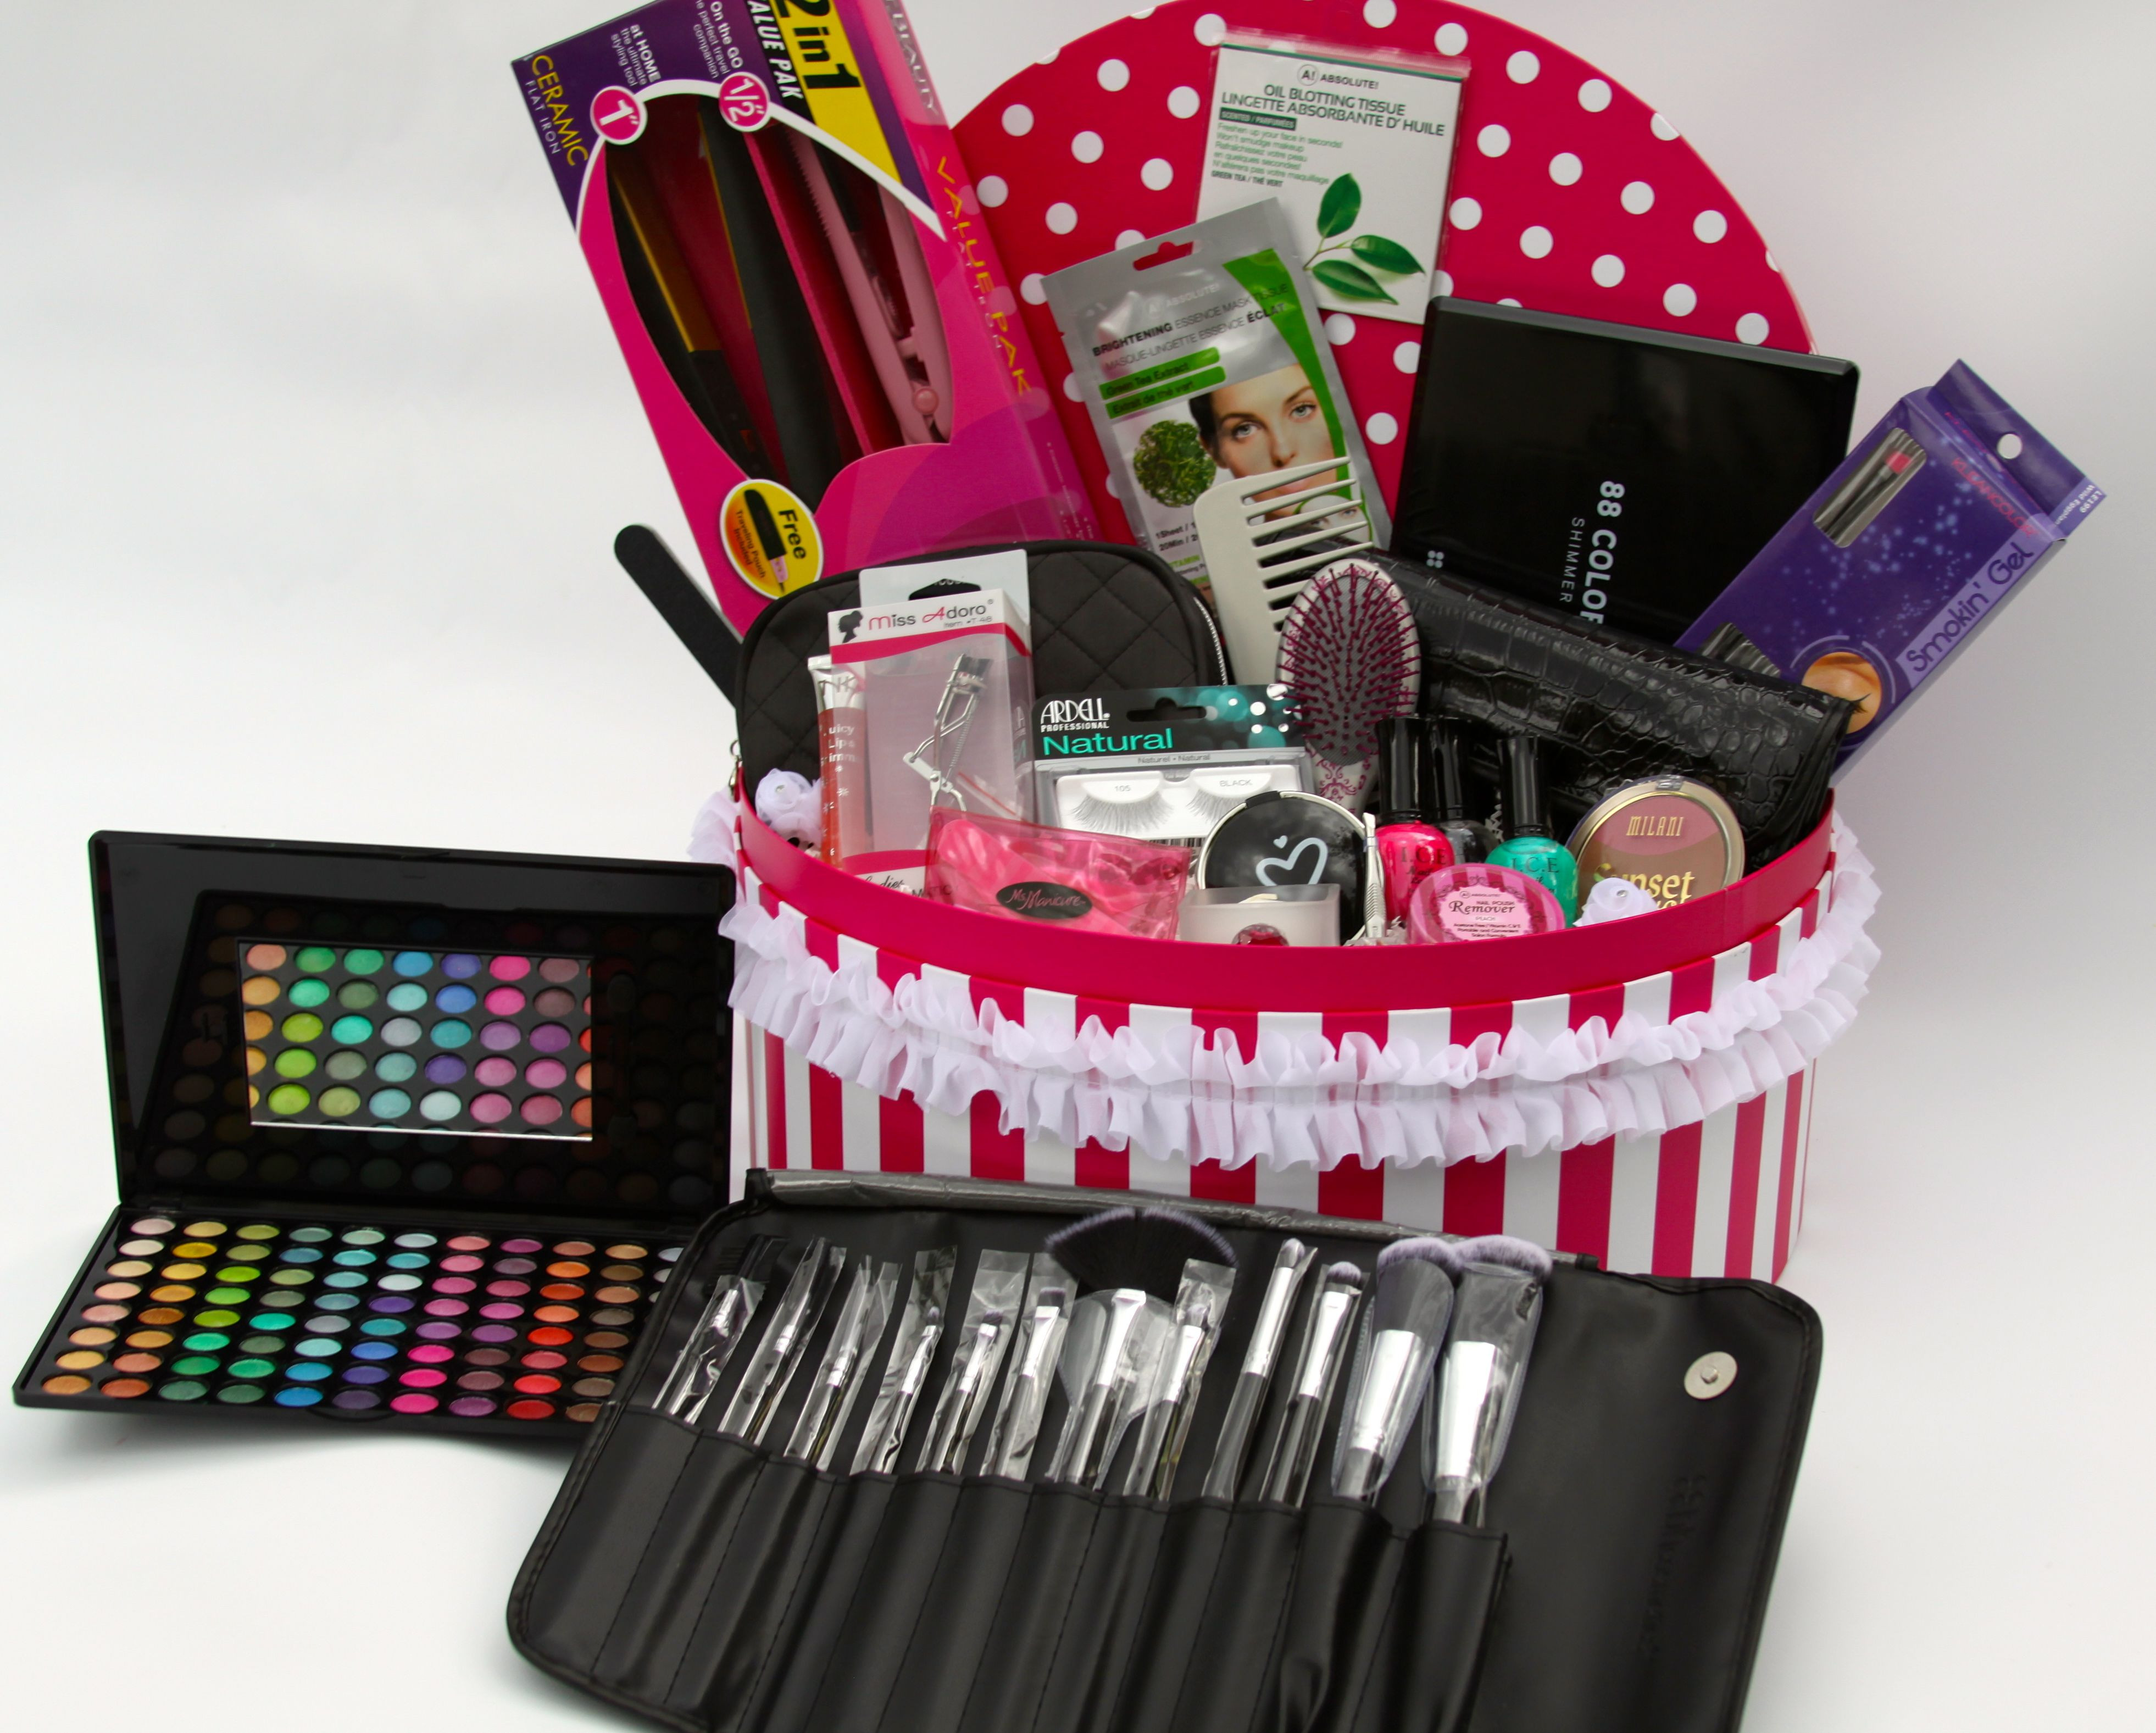 Makeup Gift Baskets Ideas
 This t basket is full of awesome beauty and makeup